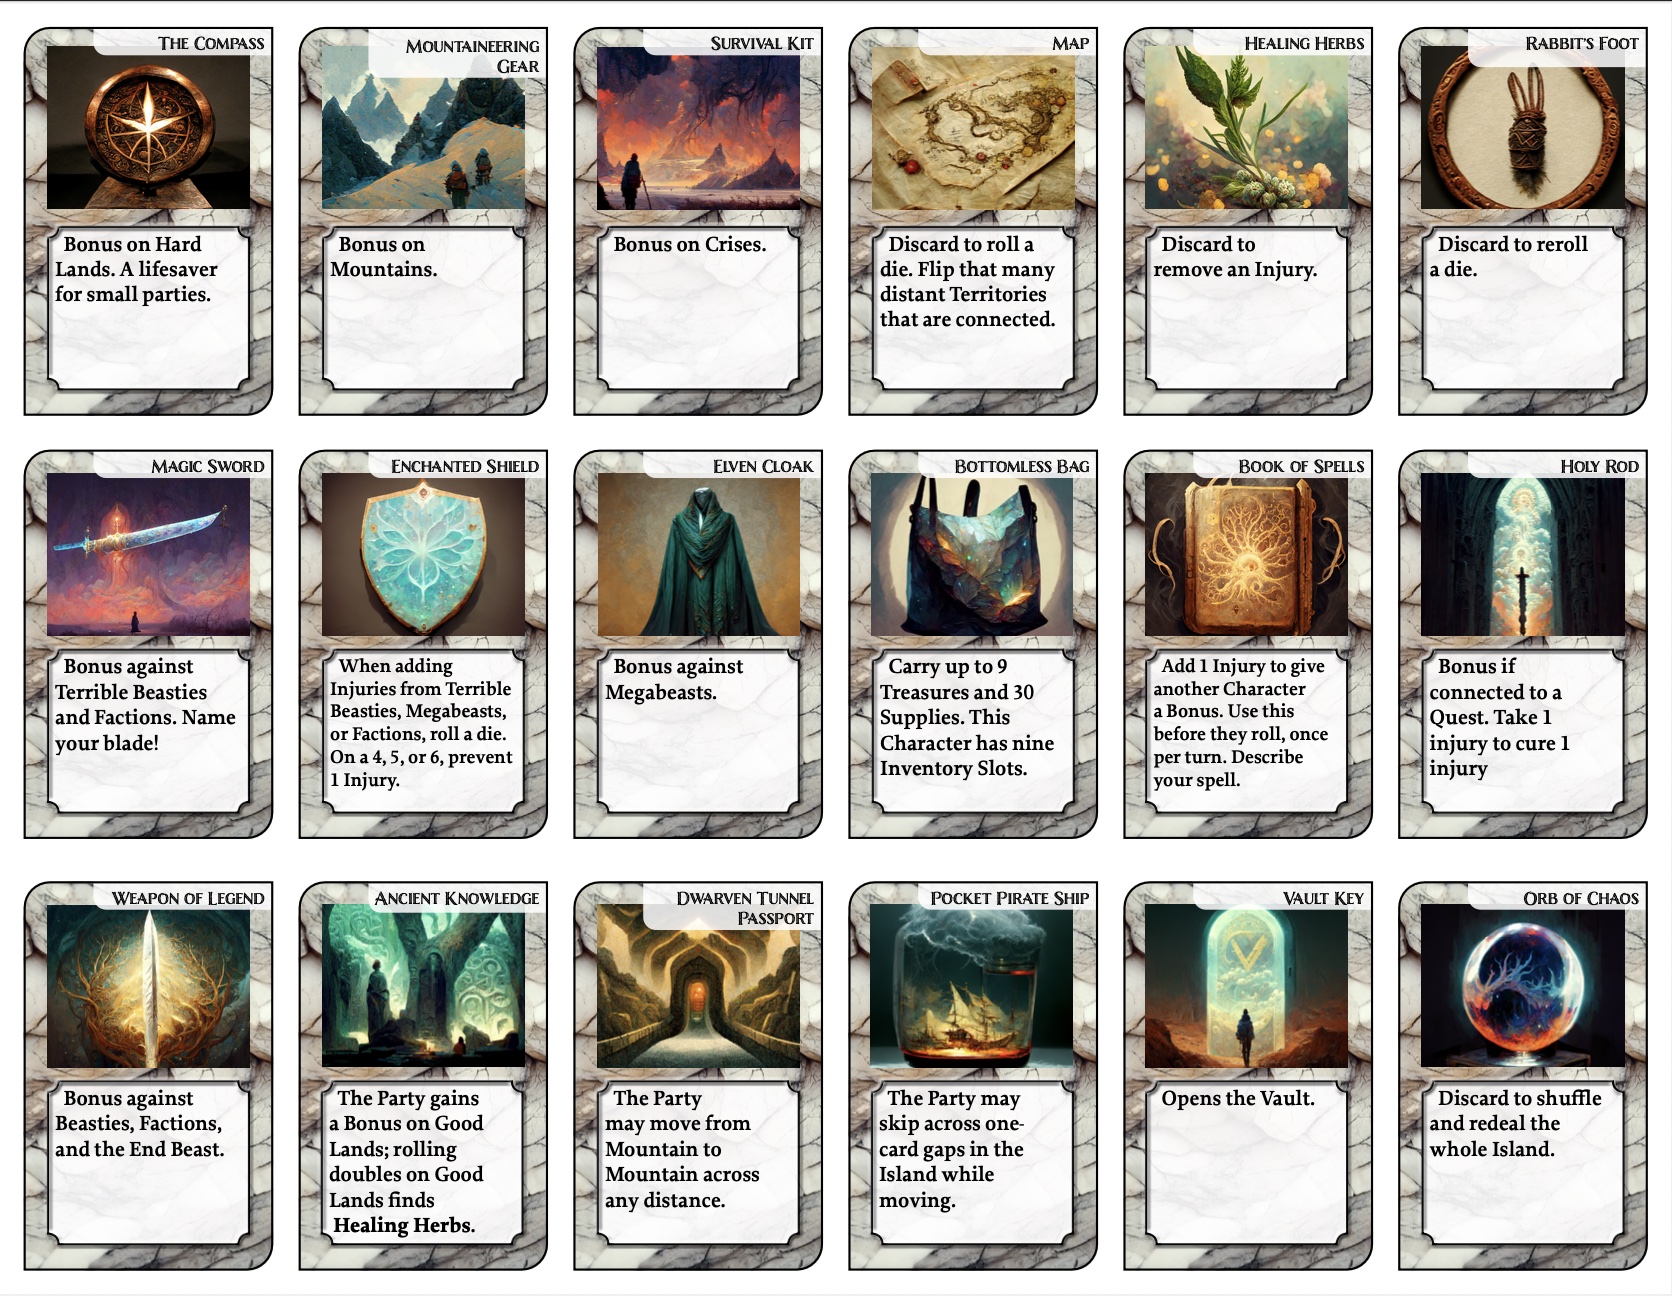 QuestCrawl 2.0 Supplemental Page 2 Item Cards